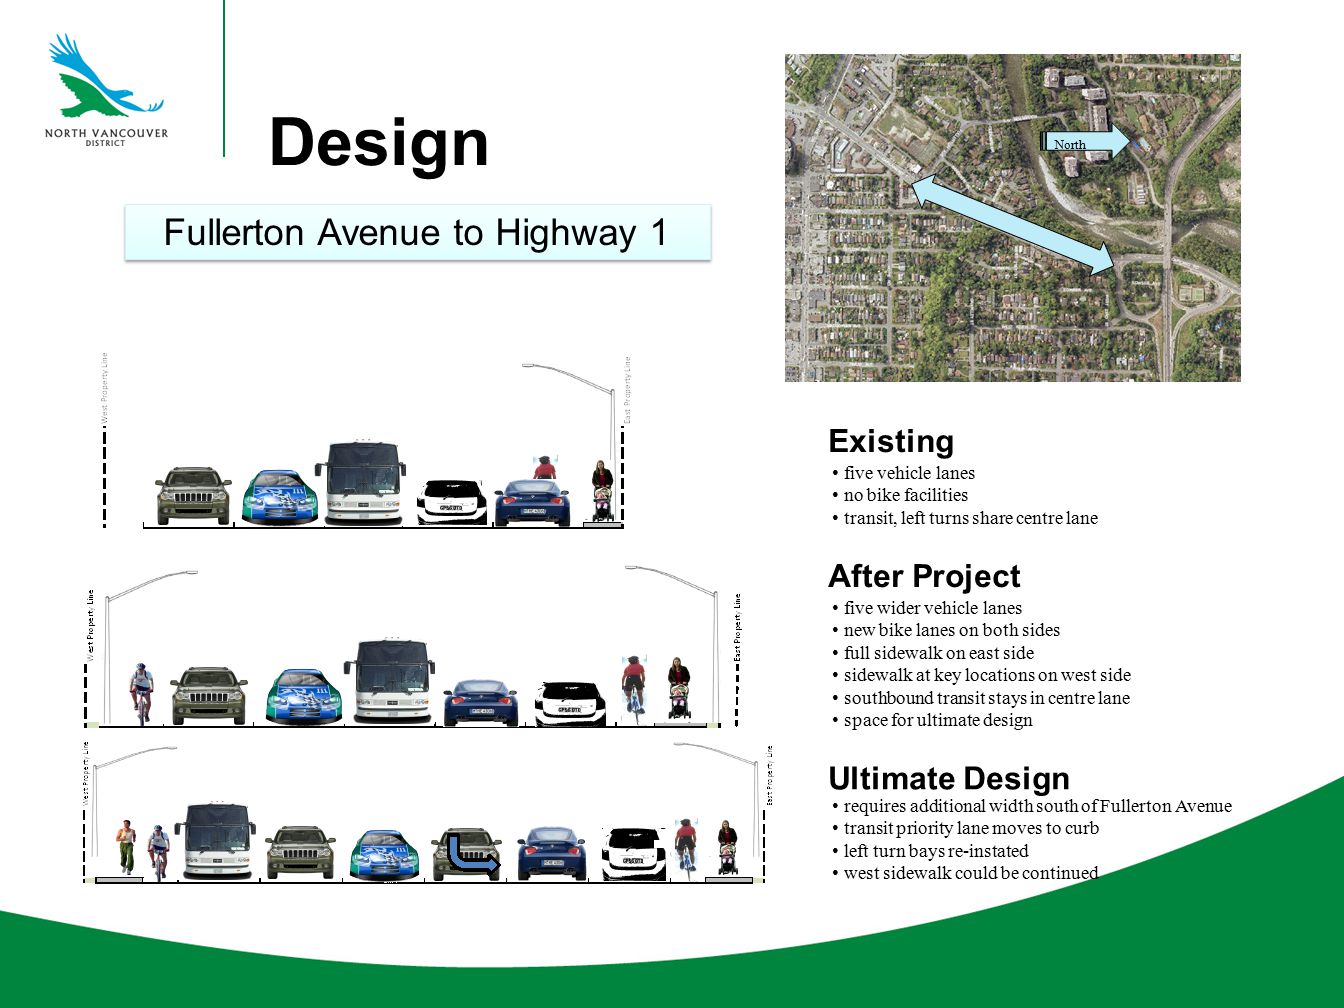 Design Existing After Project five vehicle lanes no bike facilities transit, left turns share centre lane five wider vehicle lanes new bike lanes on both sides full sidewalk on east side sidewalk at key locations on west side southbound transit stays in centre lane space for ultimate design requires additional width south of Fullerton Avenue transit priority lane moves to curb left turn bays re-instated west sidewalk could be continued Ultimate Design Fullerton Avenue to Highway 1 North